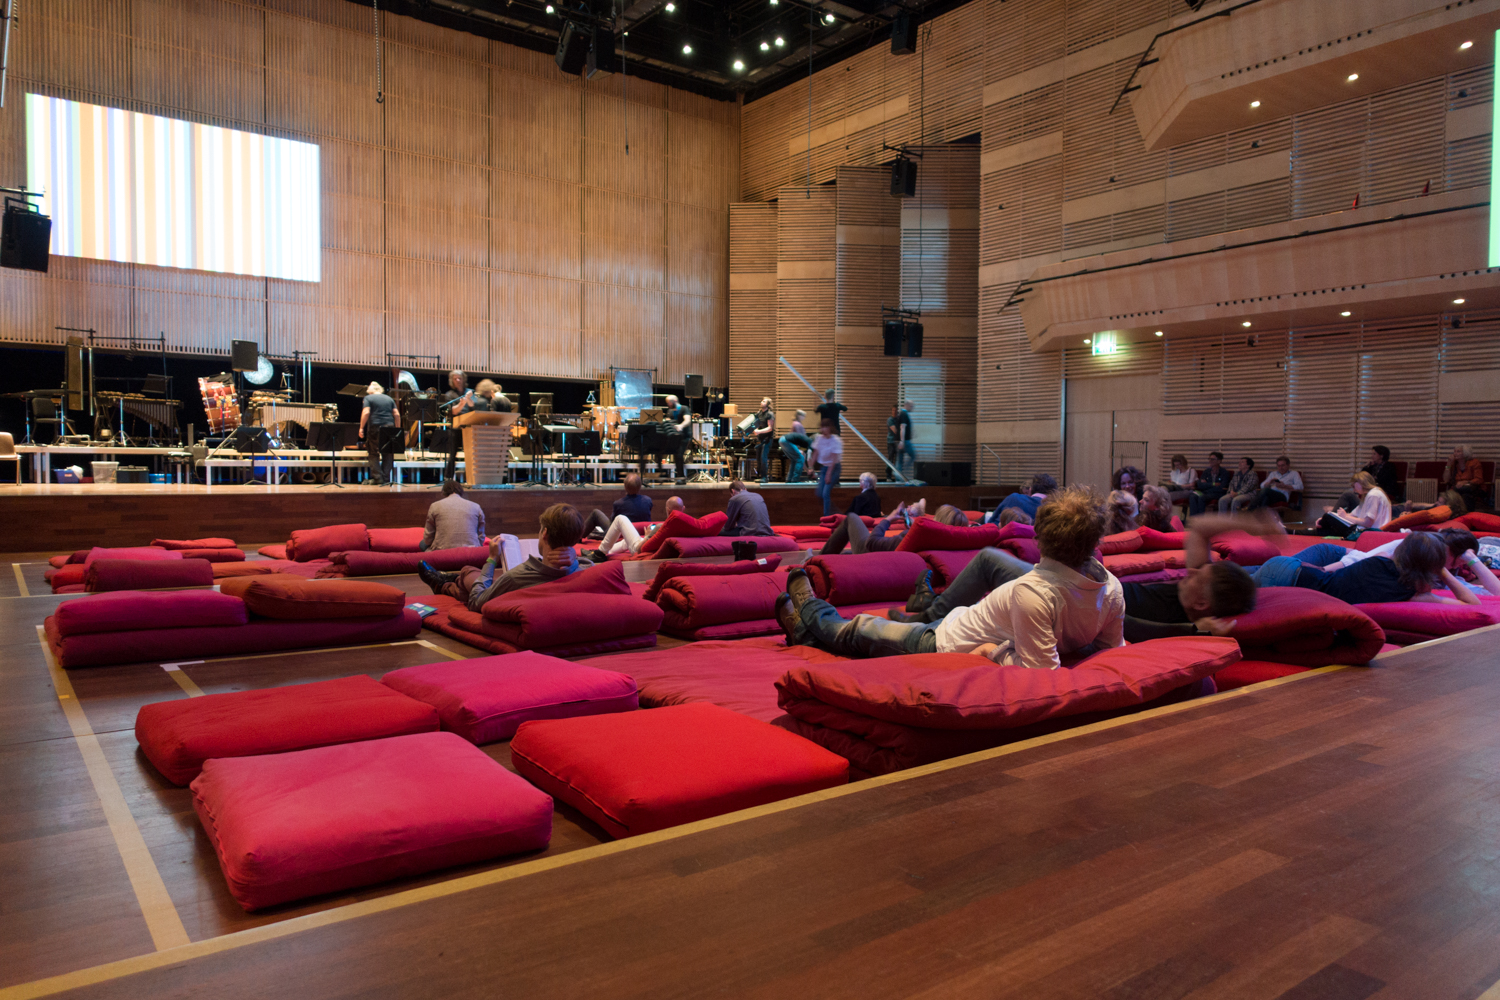    Cosy futons replace concert hall seats: the atmosphere is relaxed inside the Muziekgebouw's main hall&nbsp;   during Urbo Kune.&nbsp;Photo by Canan Marasligil  